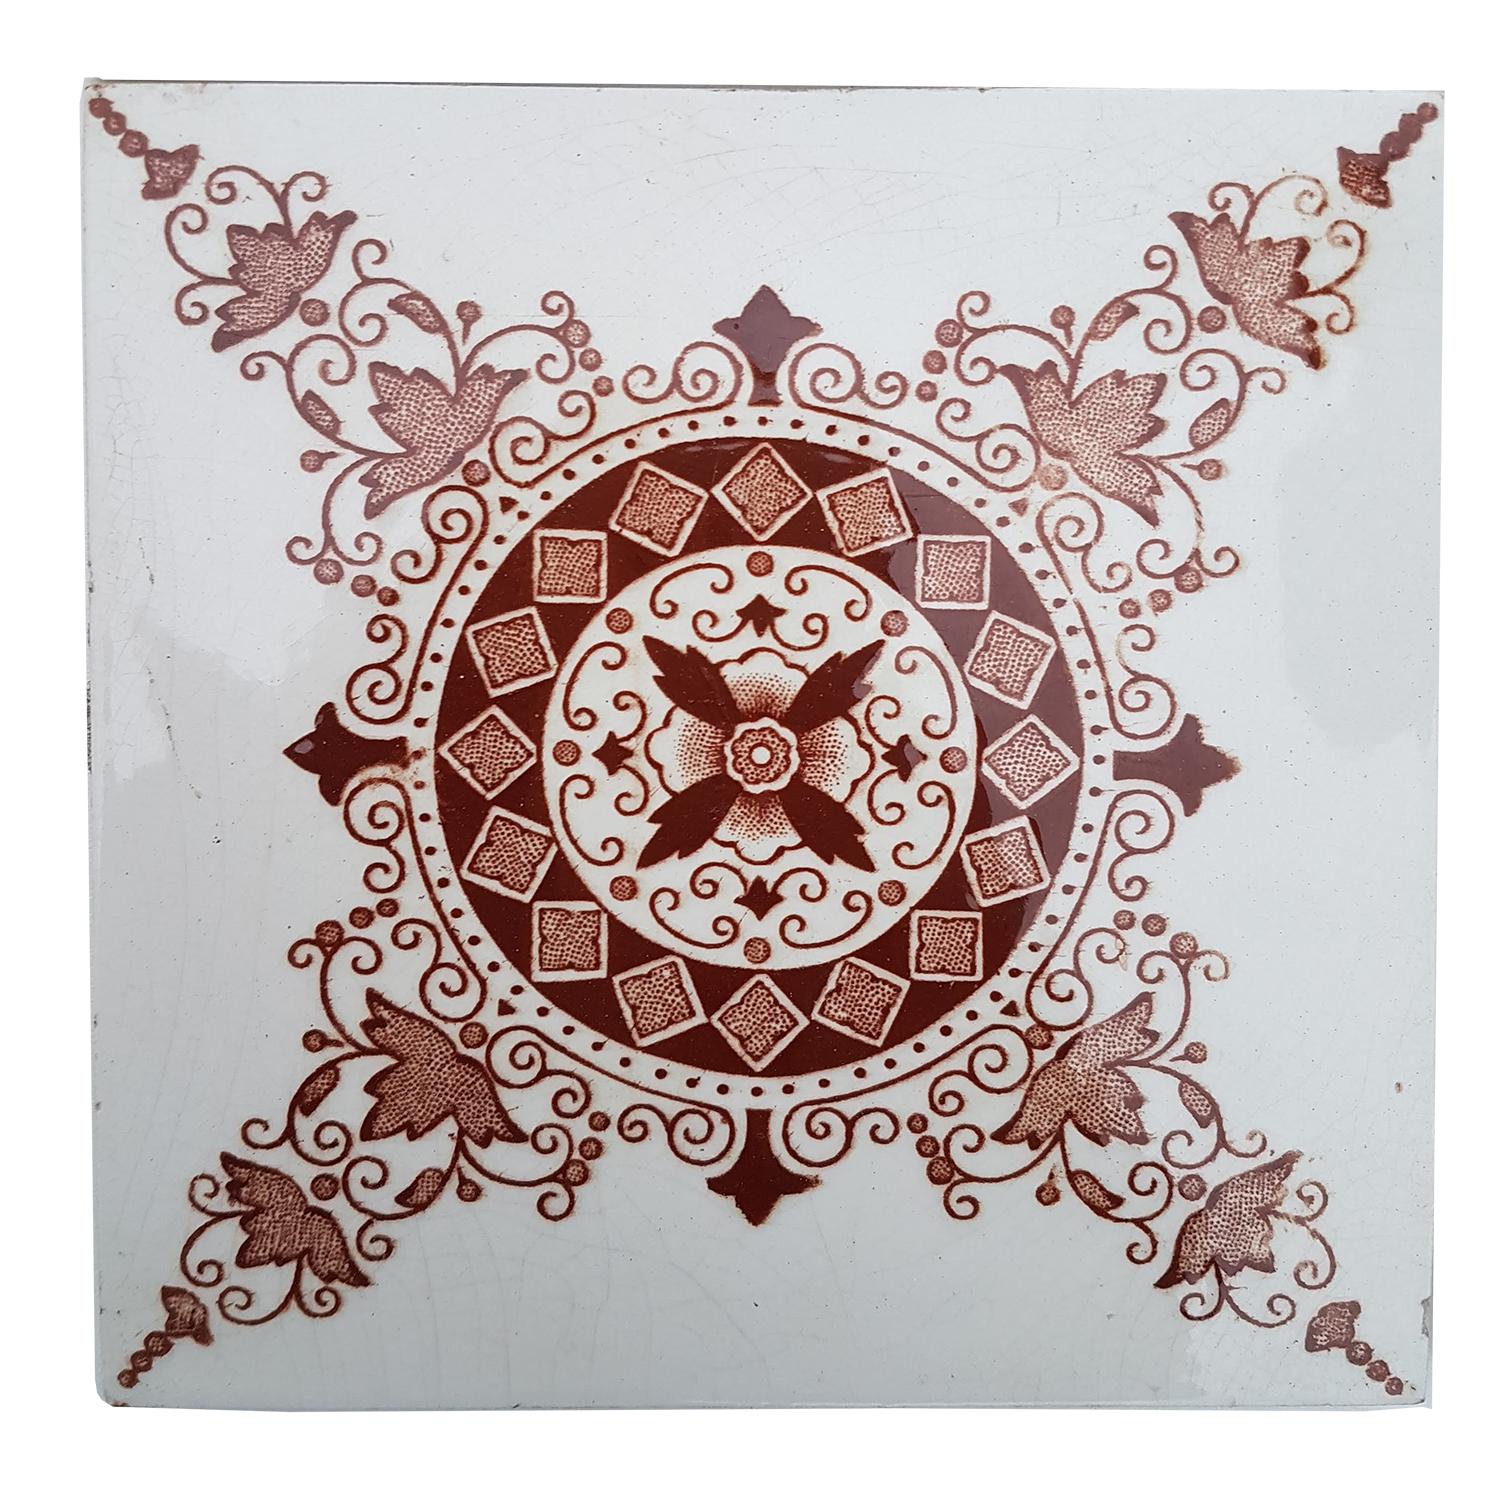 Recently lifted from its original home, a set of antique tiles from the early 20th century. With a beautiful geometric stylized design.
Manufactured by Produits Refractaires et Ceramiques Morialme (SM)

Size each tile: inches 6 inches (15.2 cm)